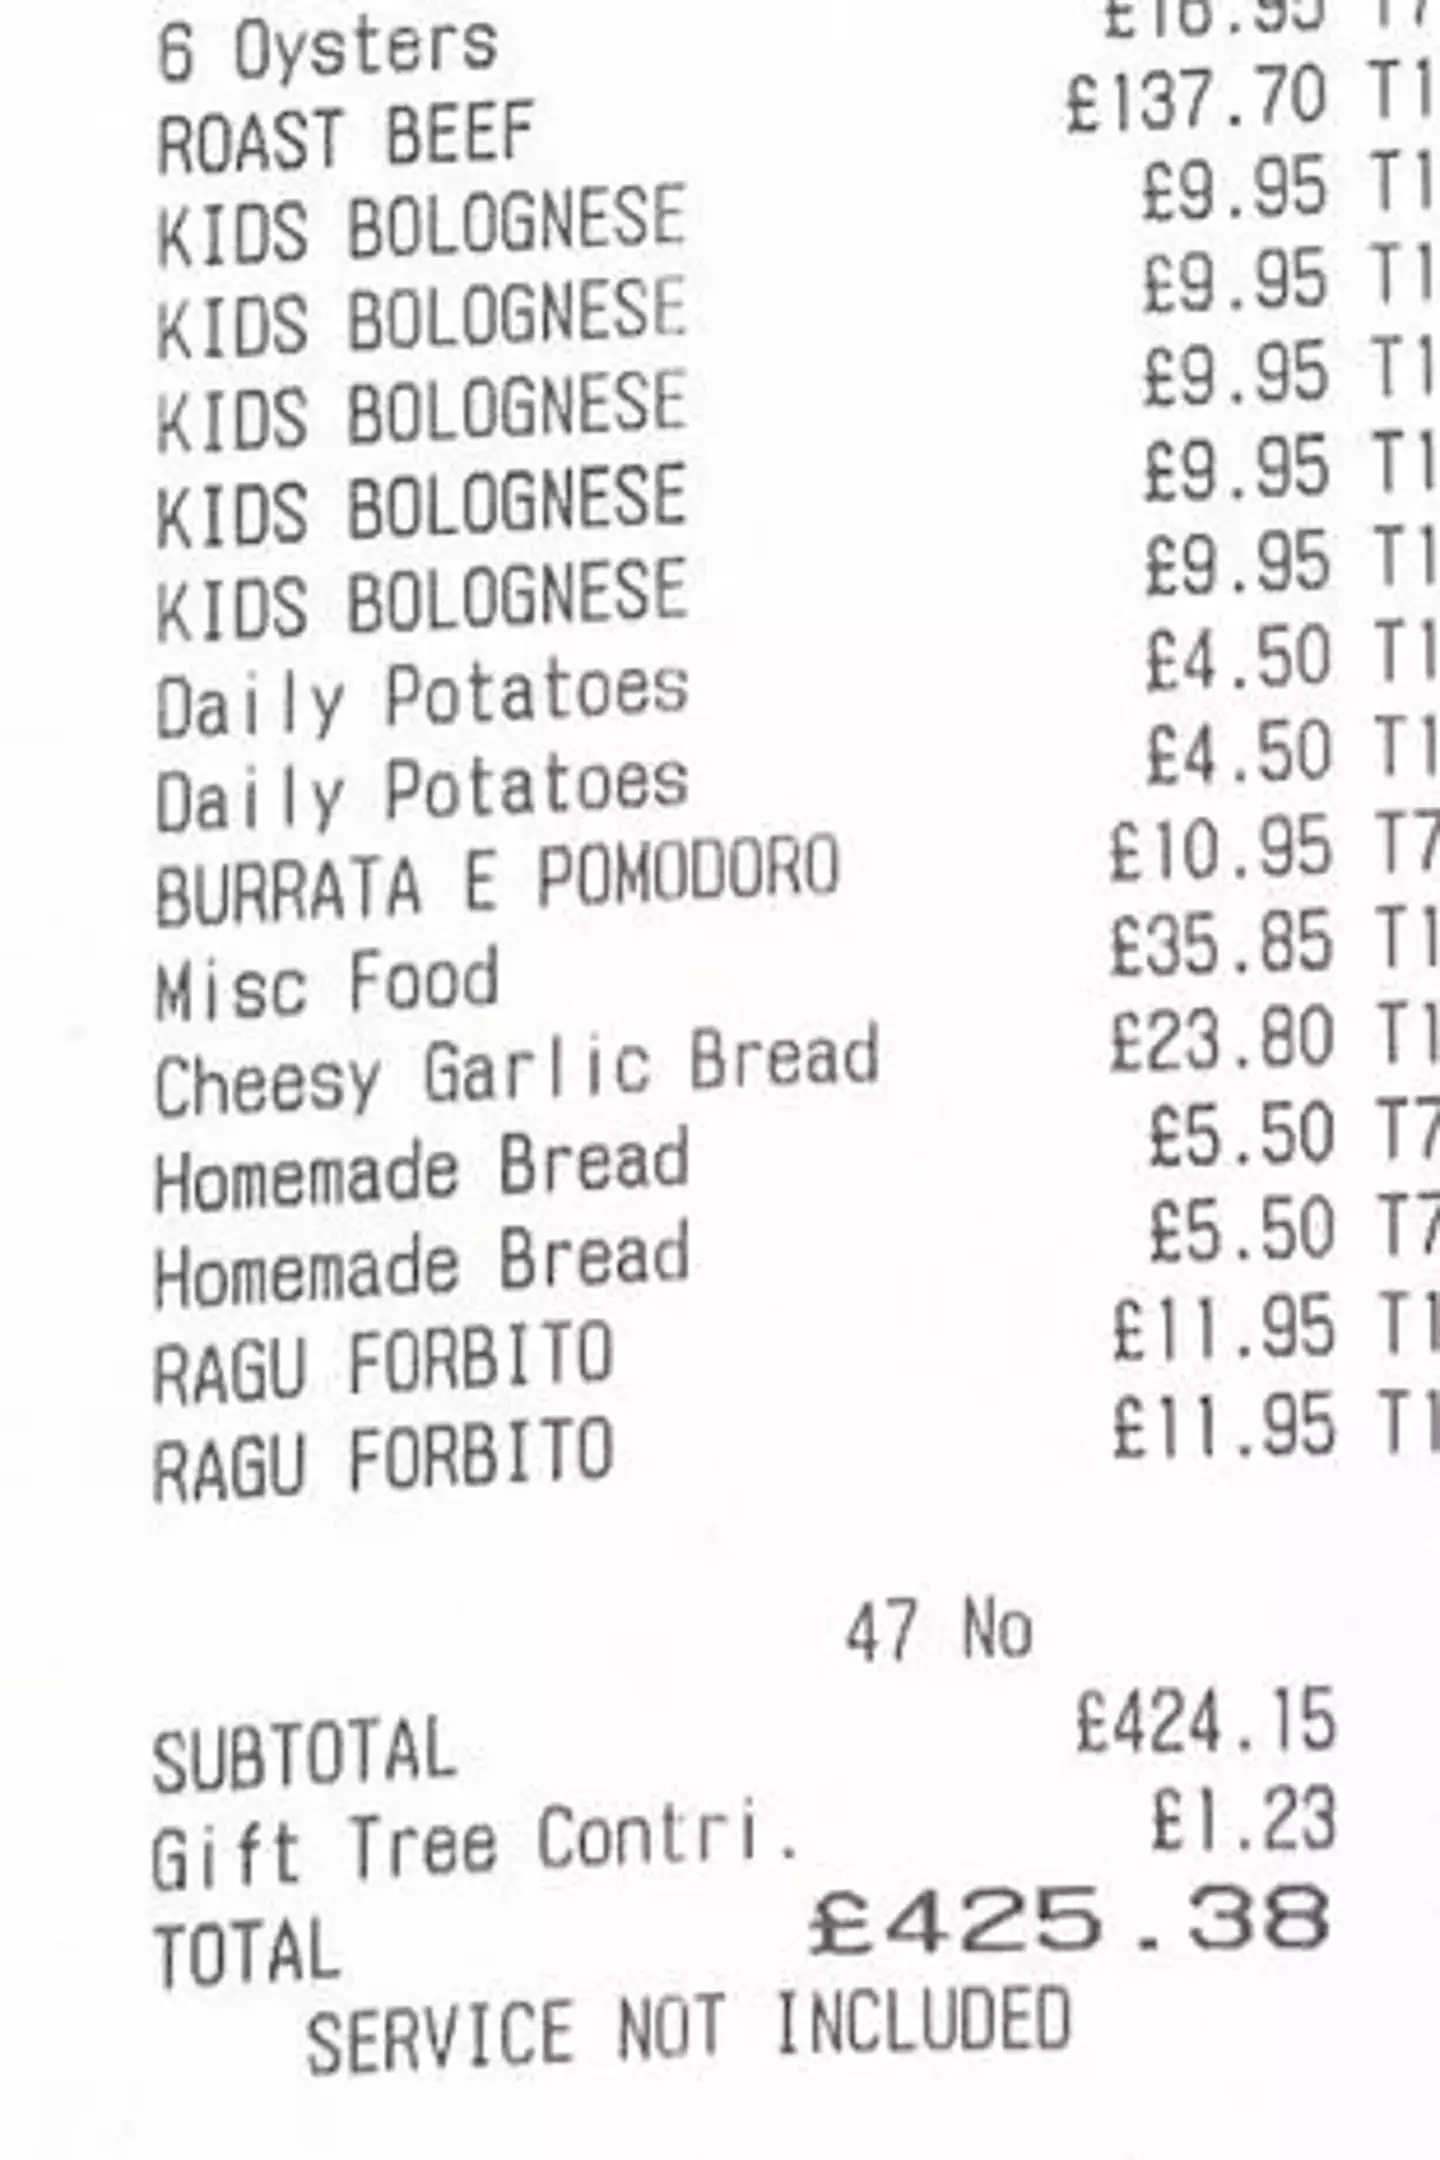 A picture of the alleged bill was shared by the restaurant.